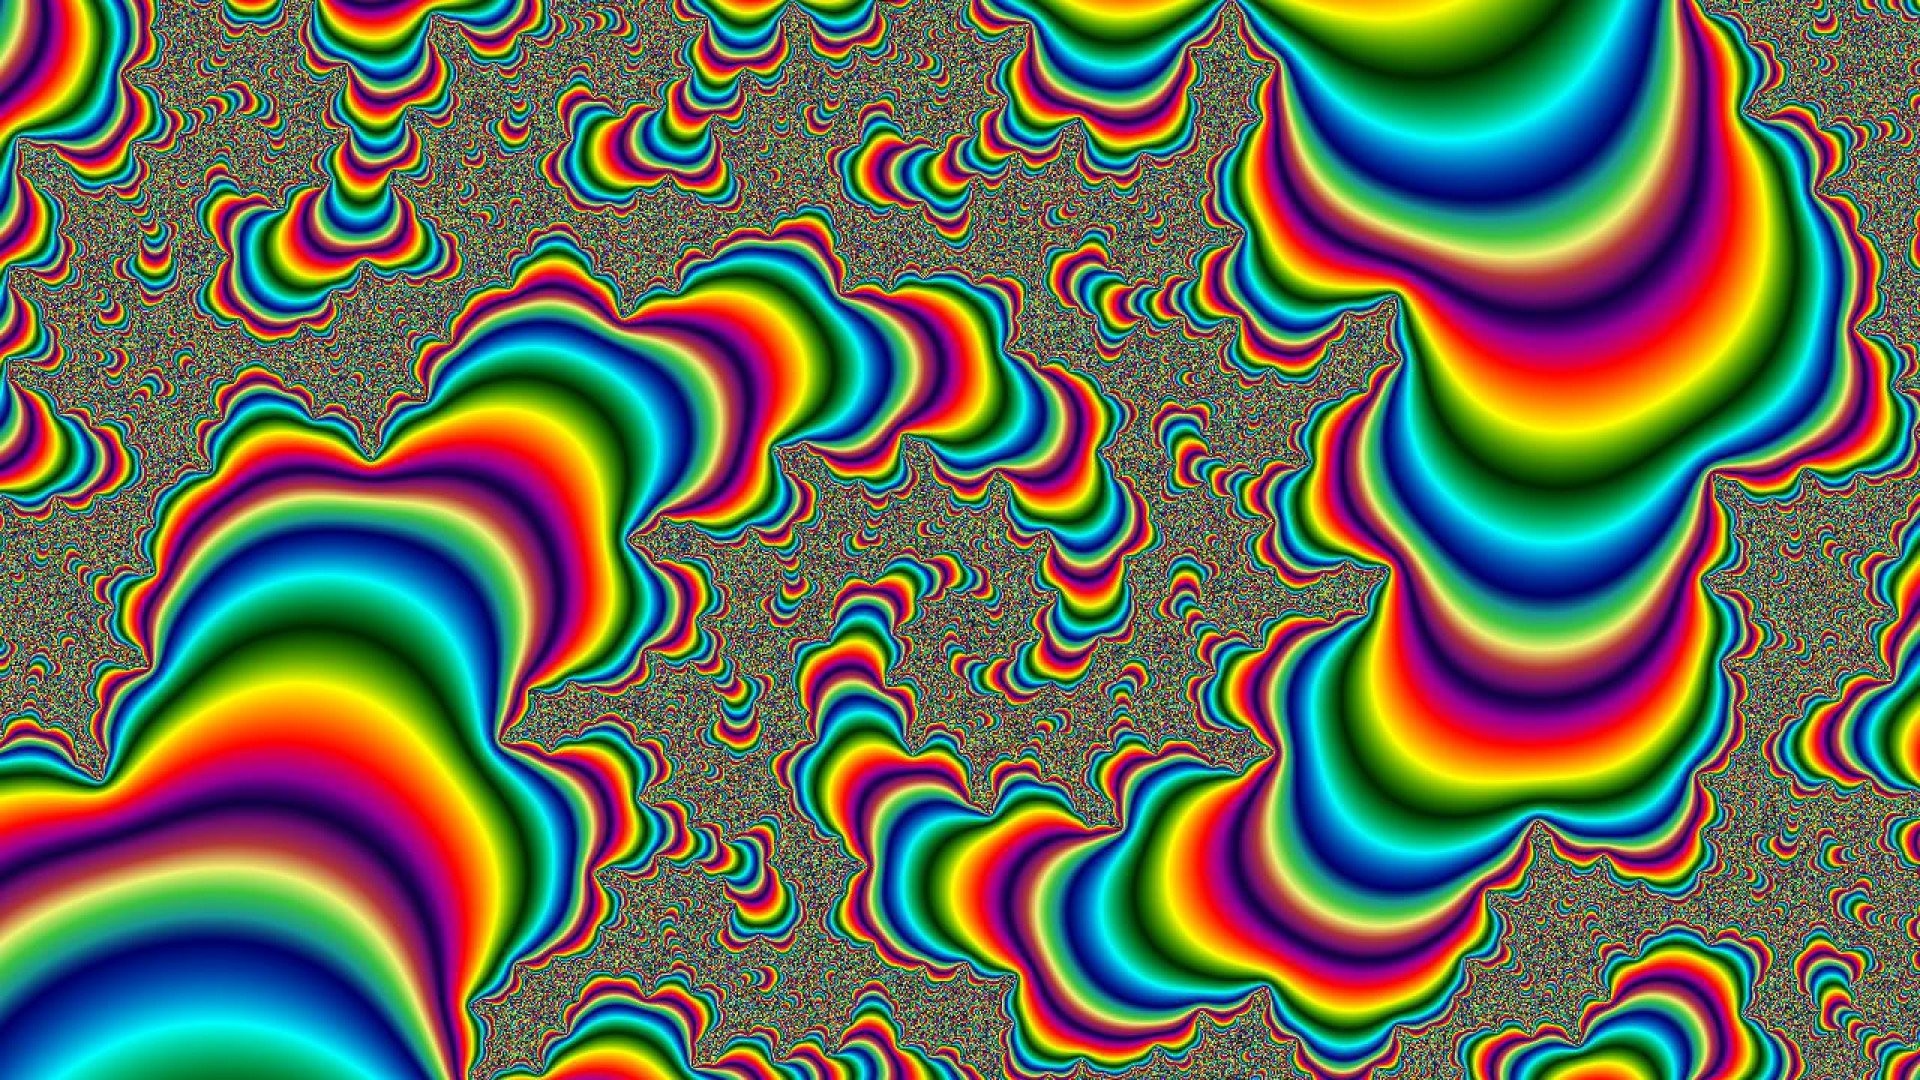 Rotating Wallpaper By Craig Berry Desktop Background Trippy